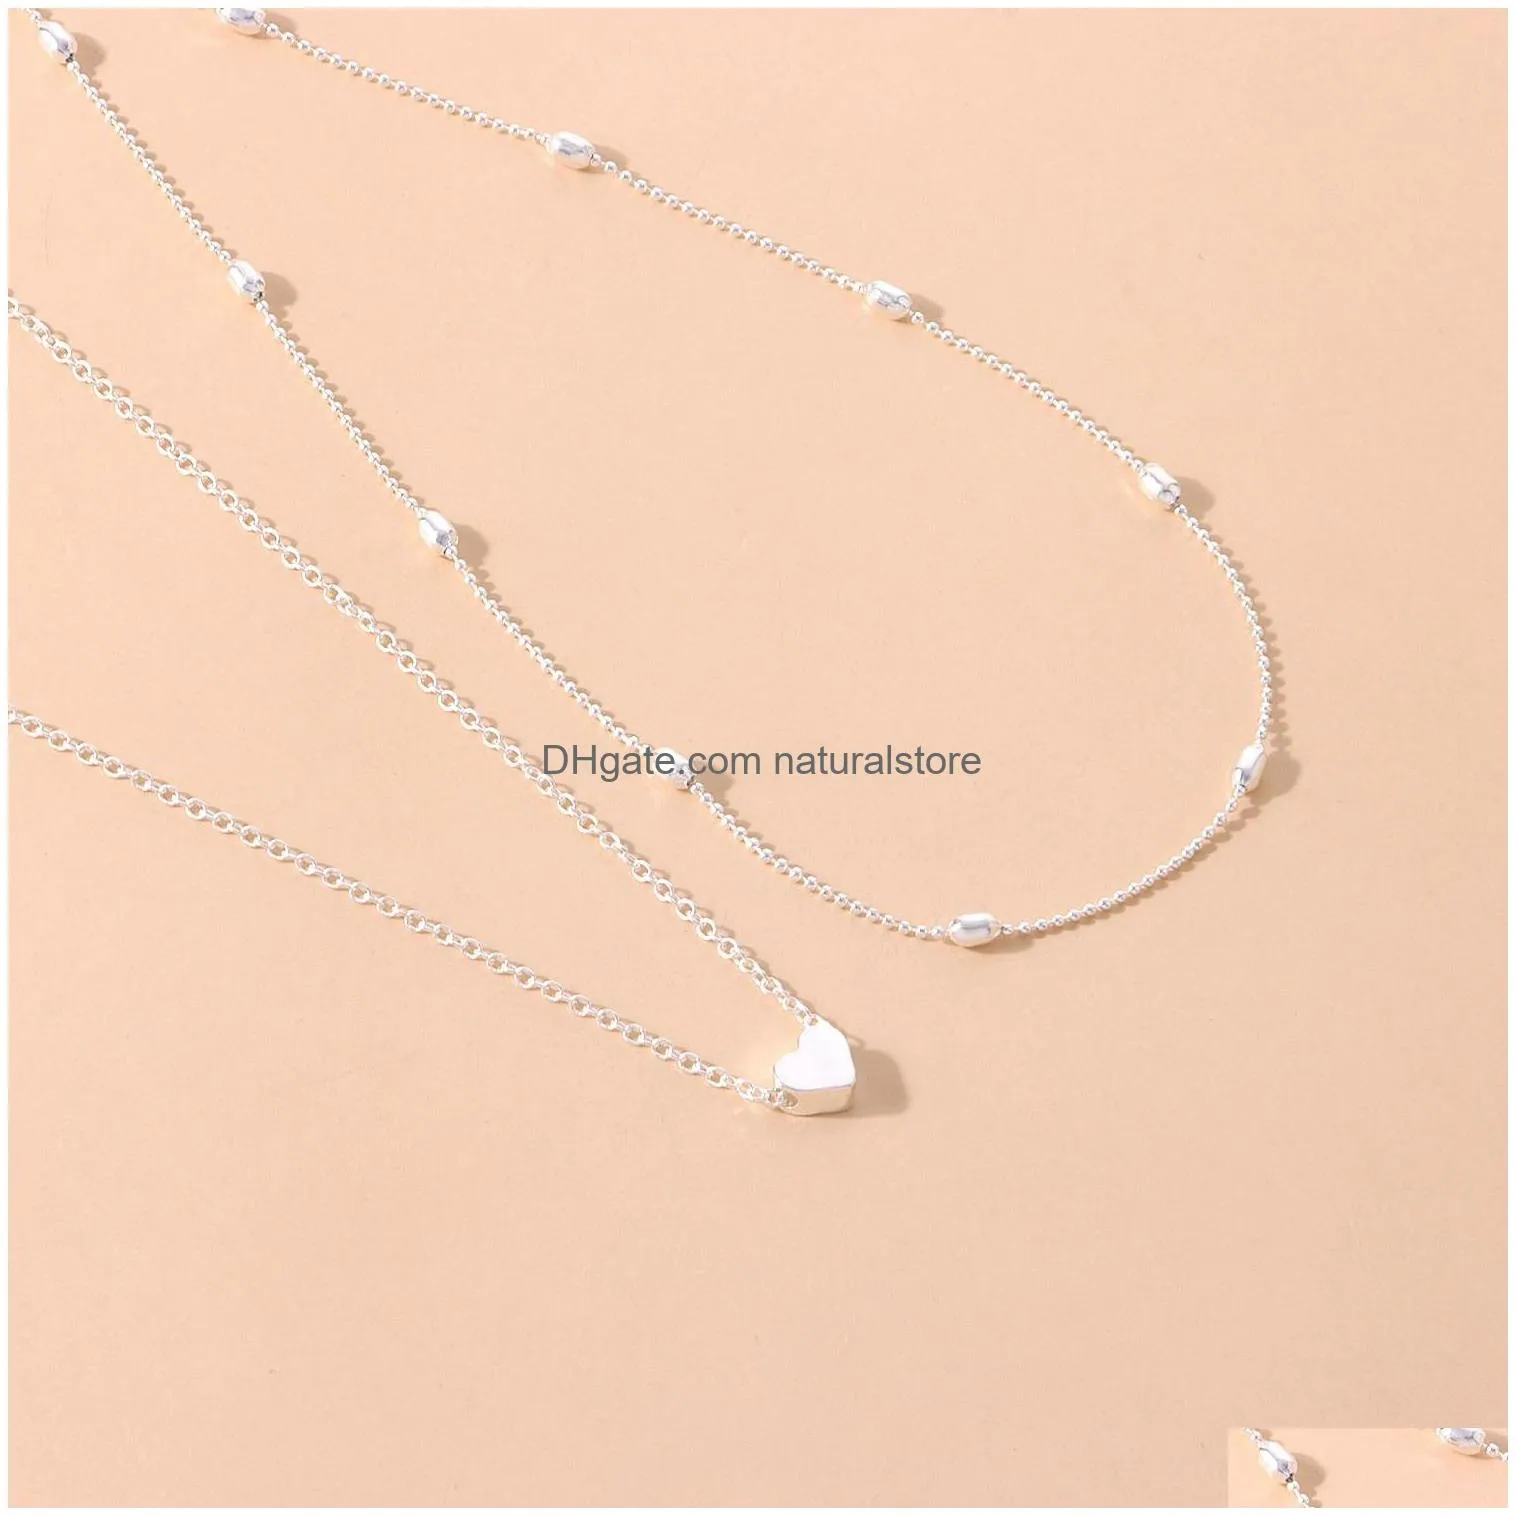 Pendant Necklaces Fashion Tiny Heart Pendant Necklace For Women Trendy Simple Gold Sier Color Chain Choker Girls Party Jewelry Gift Dr Dhm2G